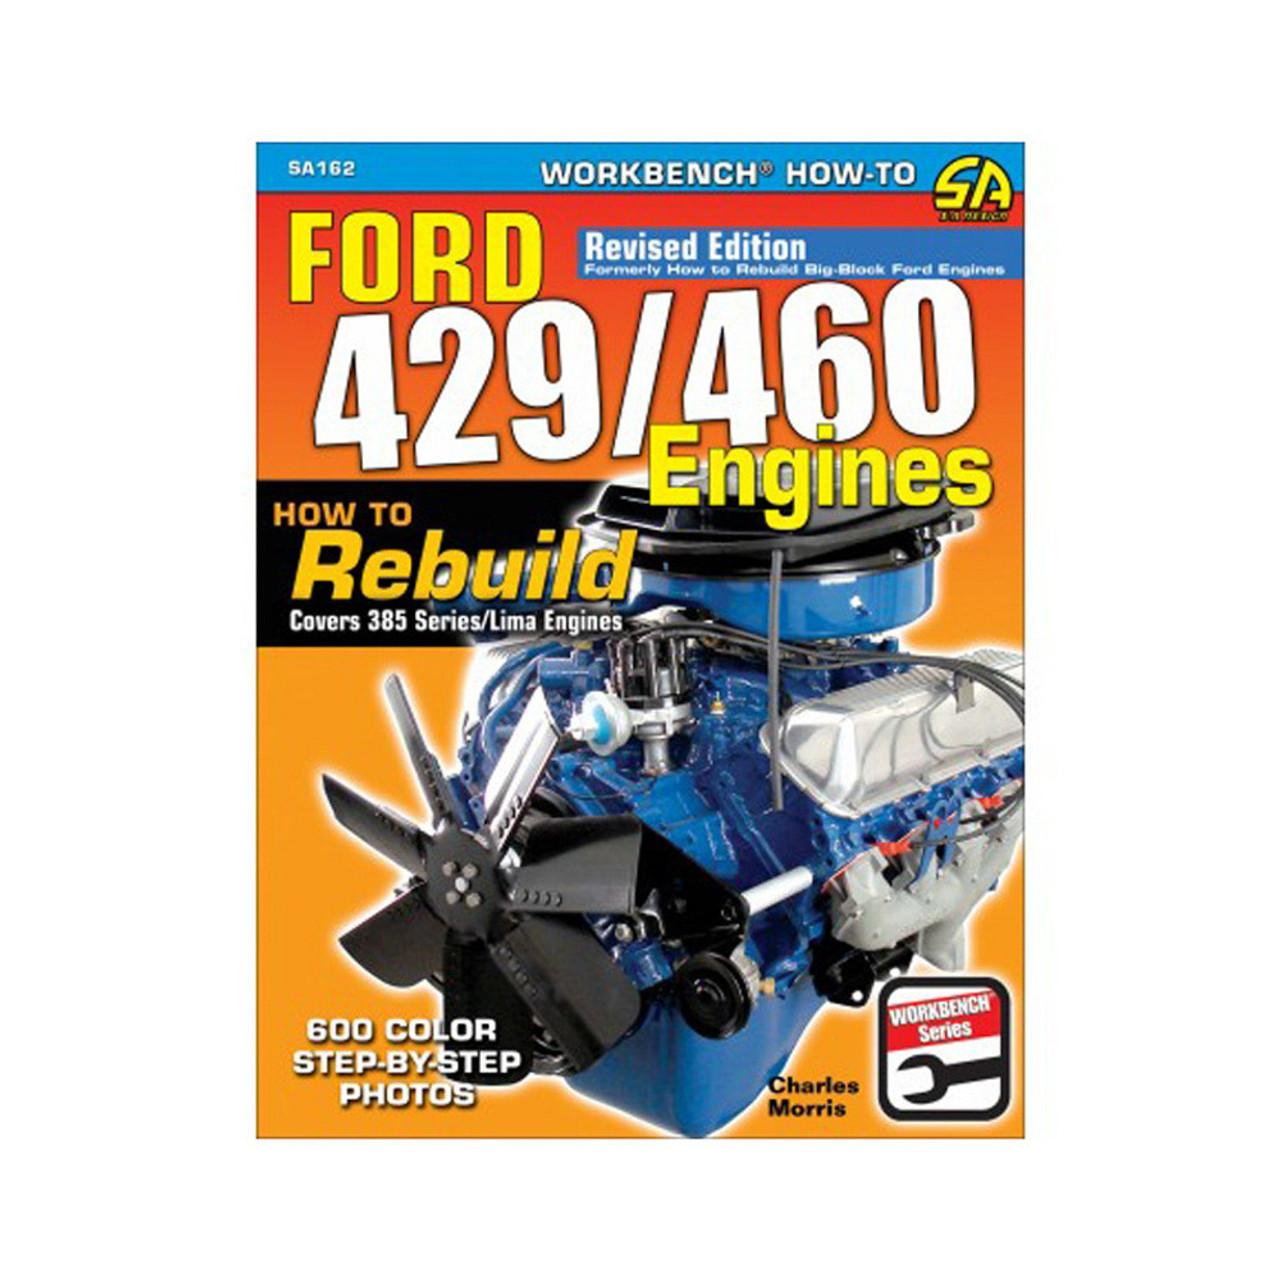 How To Rebuild Ford 429/460 Engines